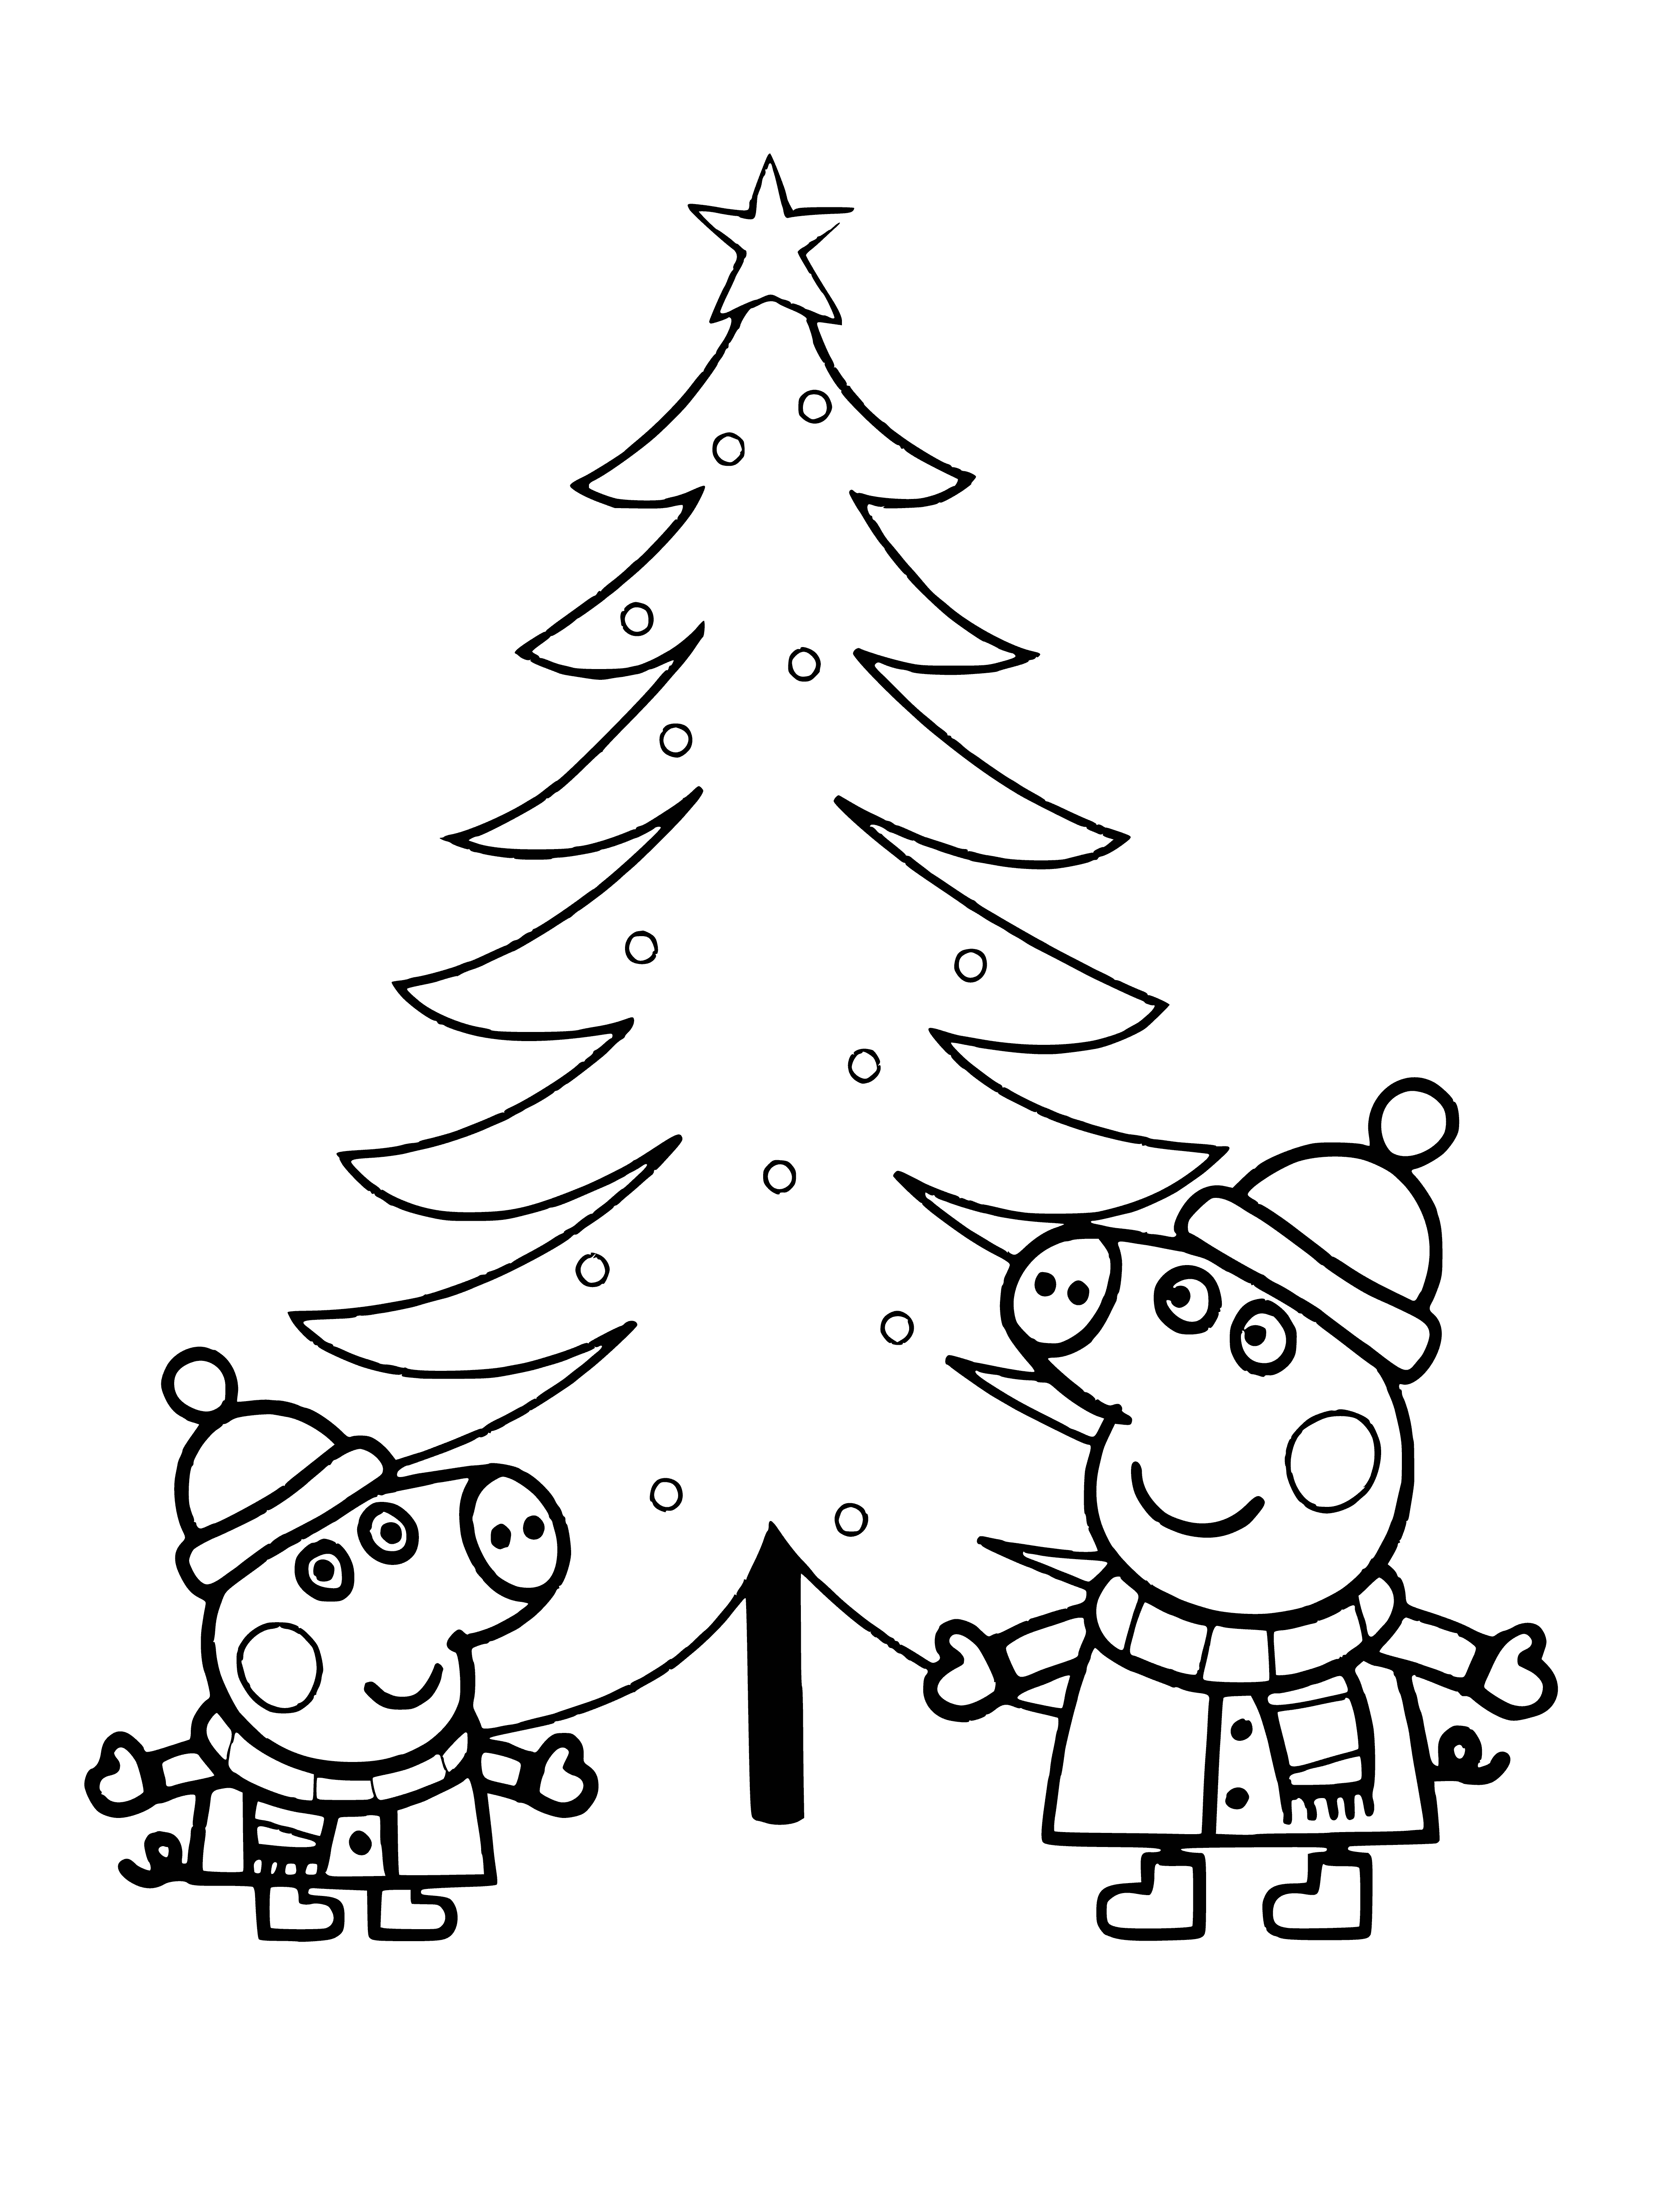 Peppa Pig by the Christmas tree coloring page